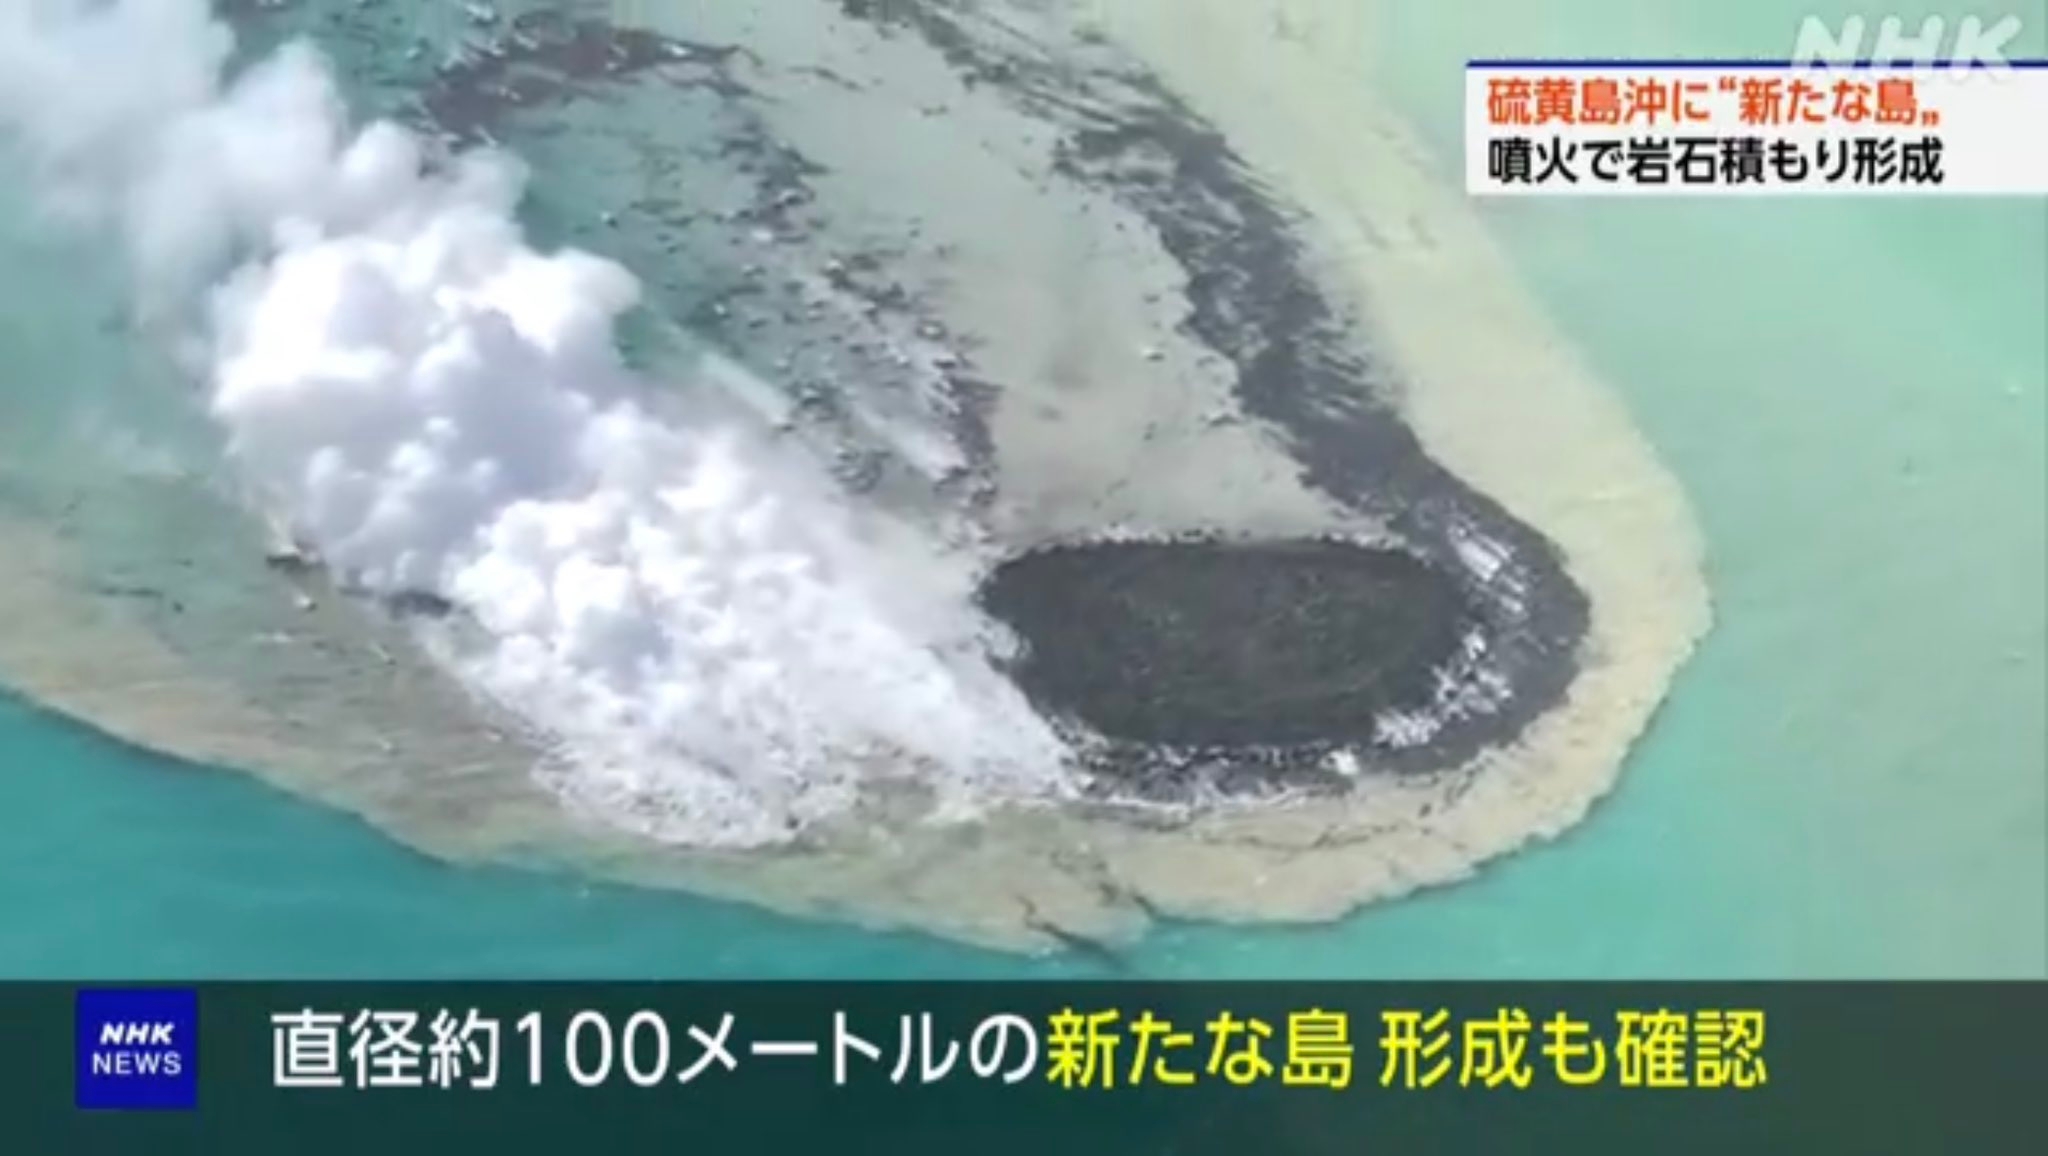 New island emerges from sea after eruptions from an underwater volcano